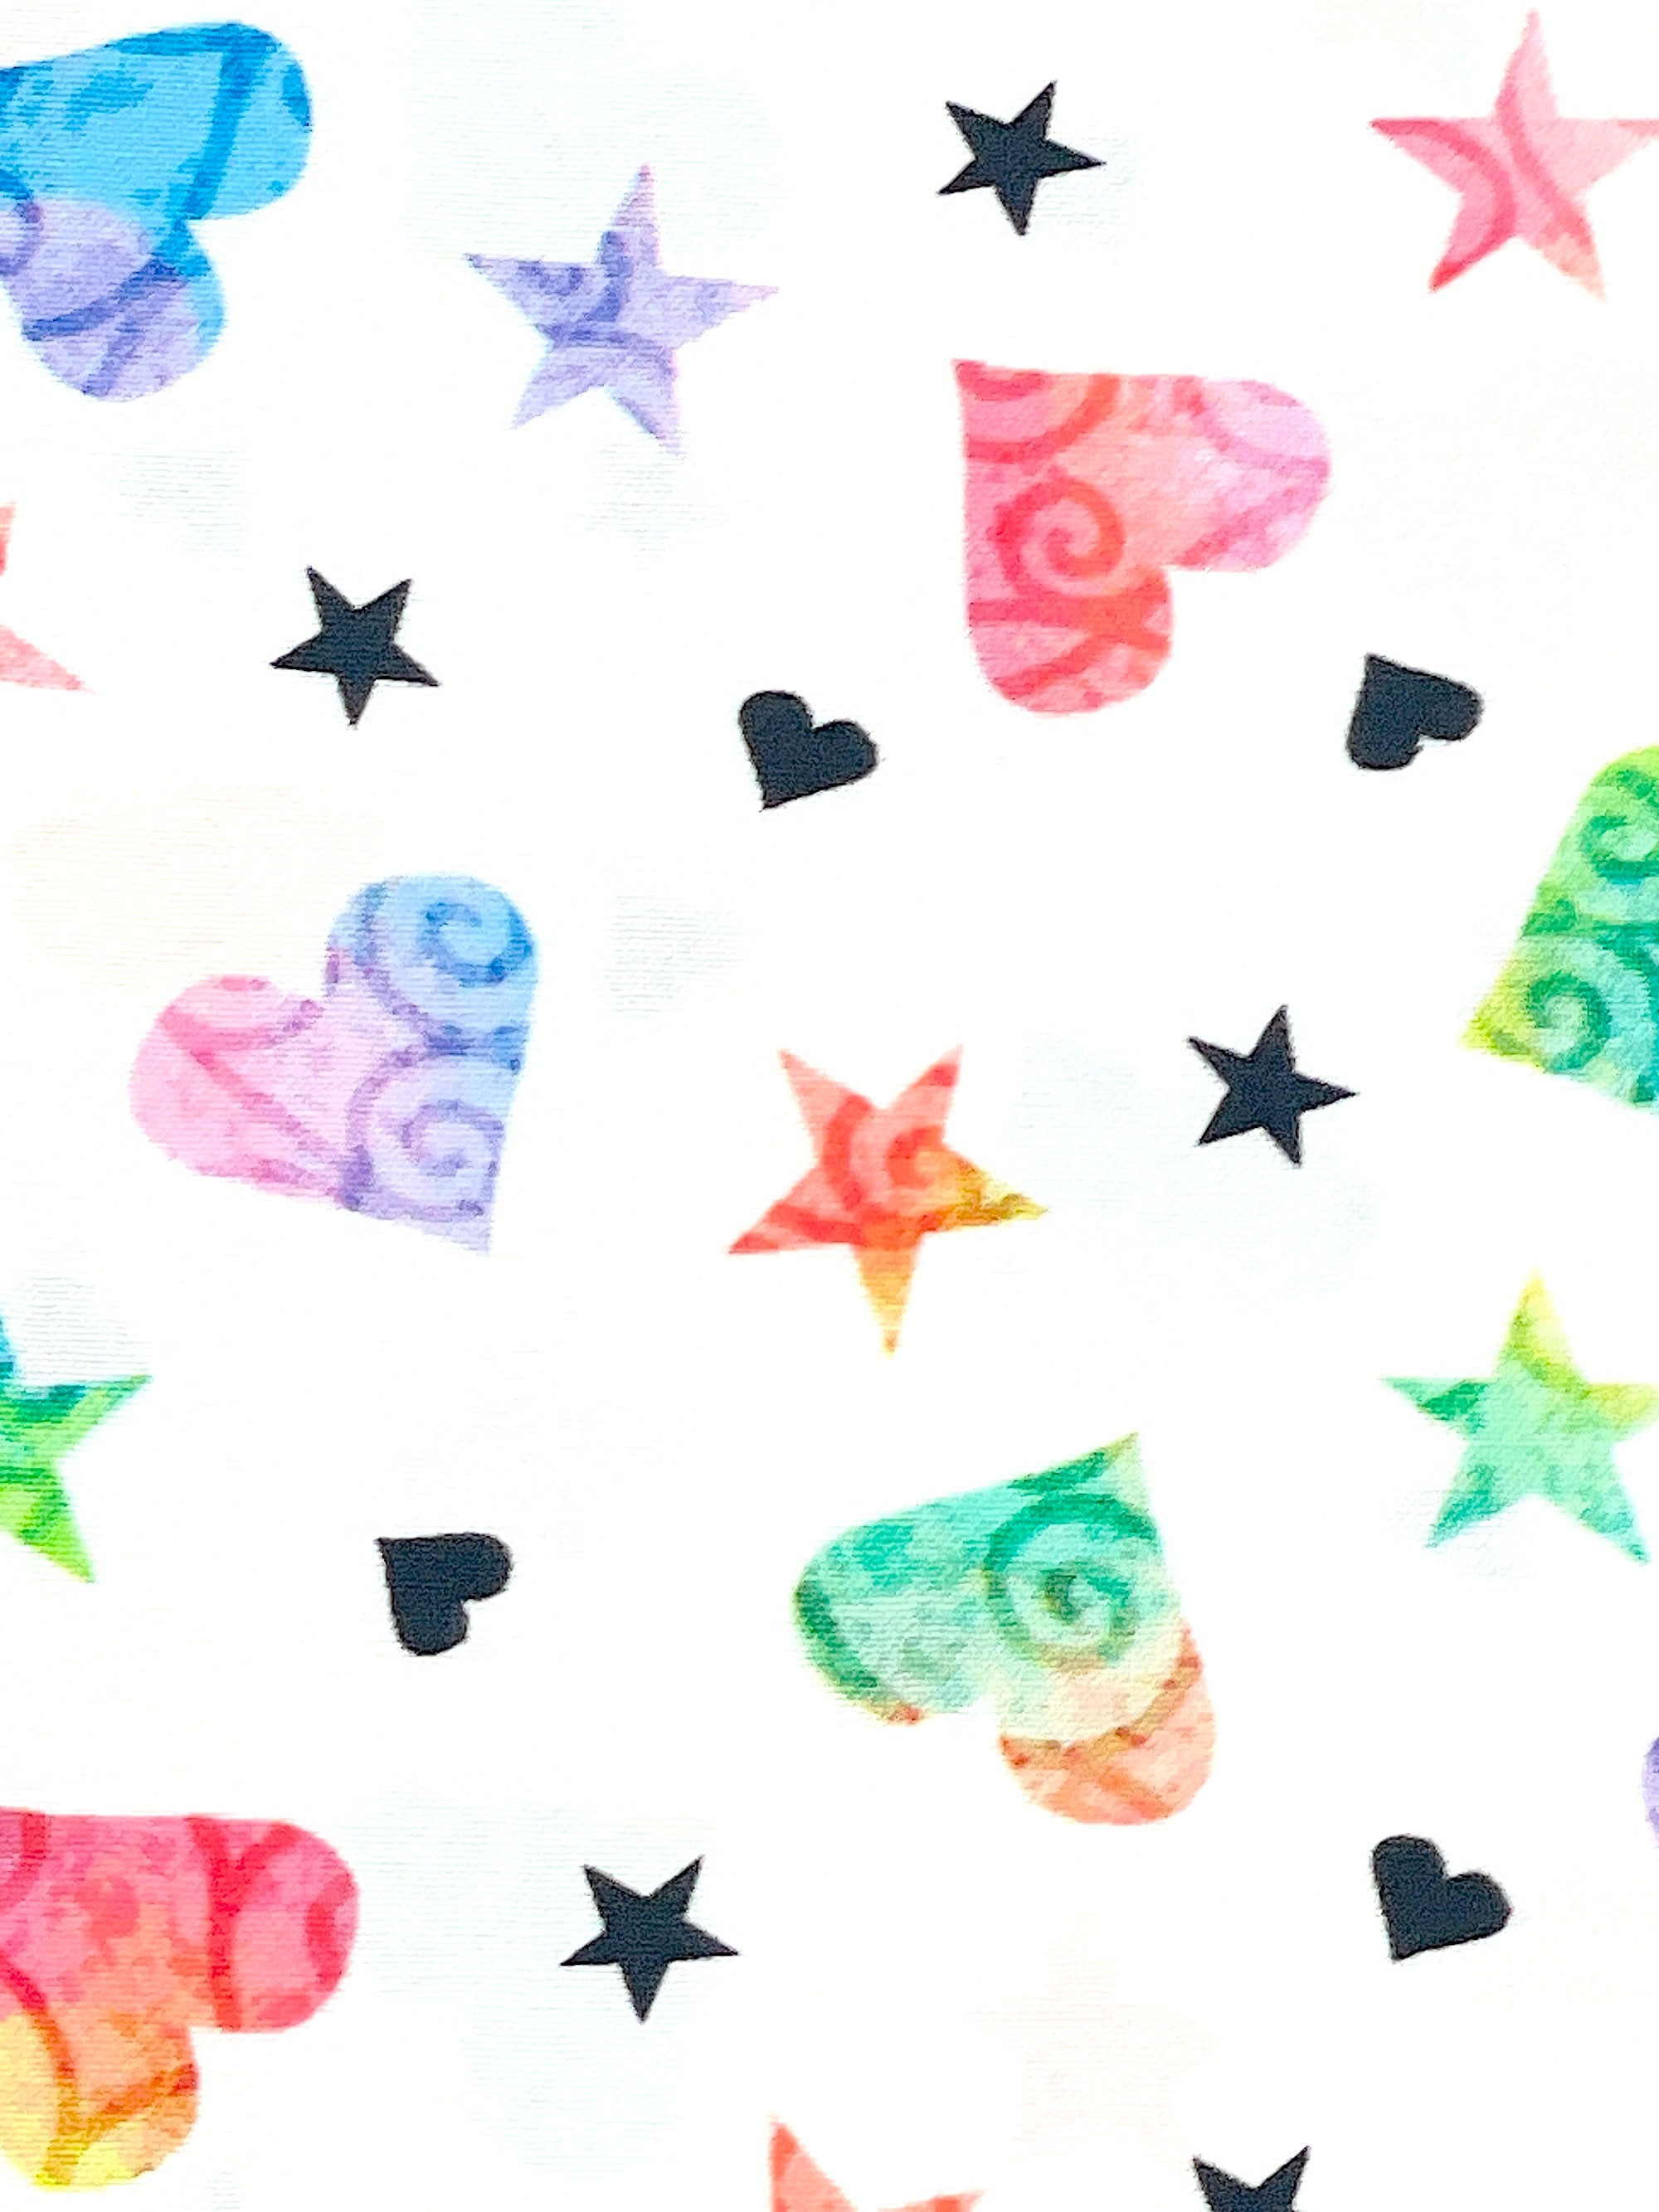 This fabric is called Be the change hearts and stars.  This white cotton fabric is covered with colorful stars and hearts.  There are purple, blue, red, yellow and green hearts and stars along with some black hearts and stars throughout the fabric.